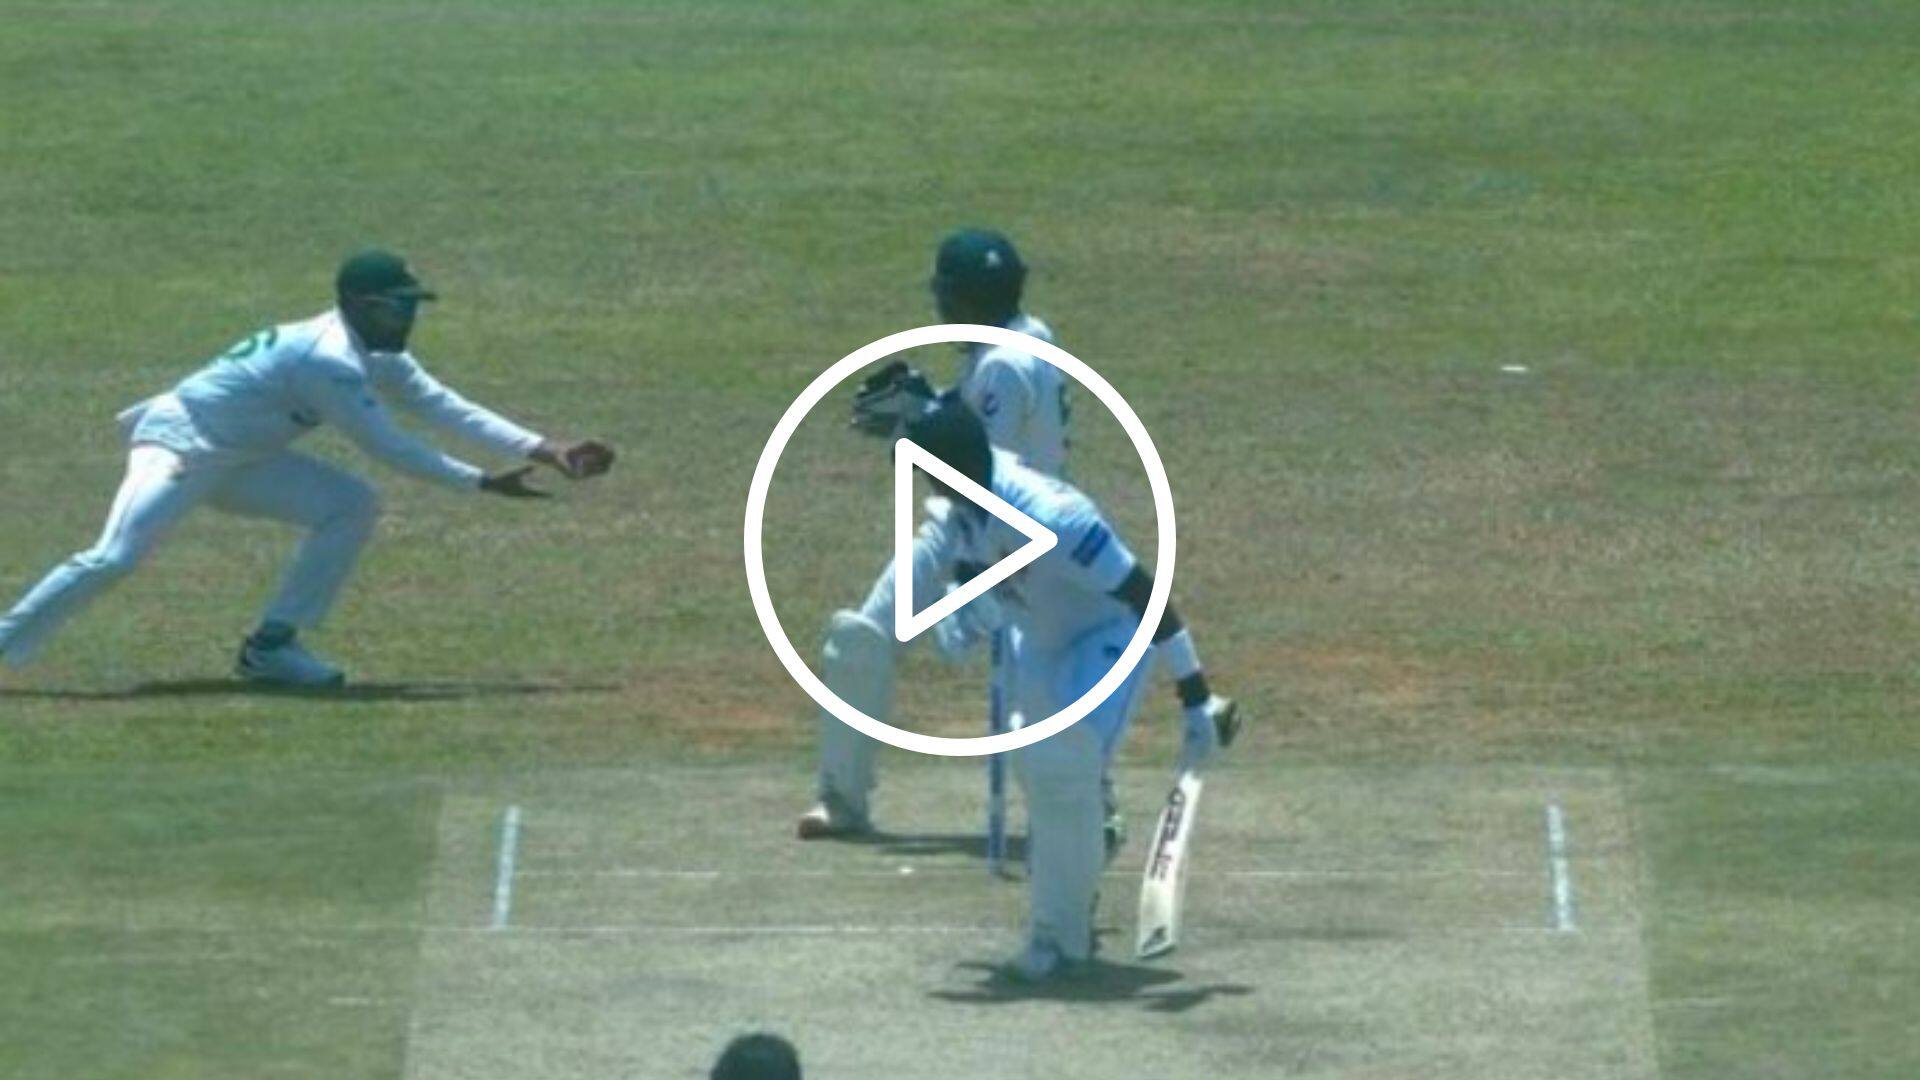 [Watch] Babar Azam's One-Handed Blinder At First Slip Dismisses Angelo Mathews at Galle